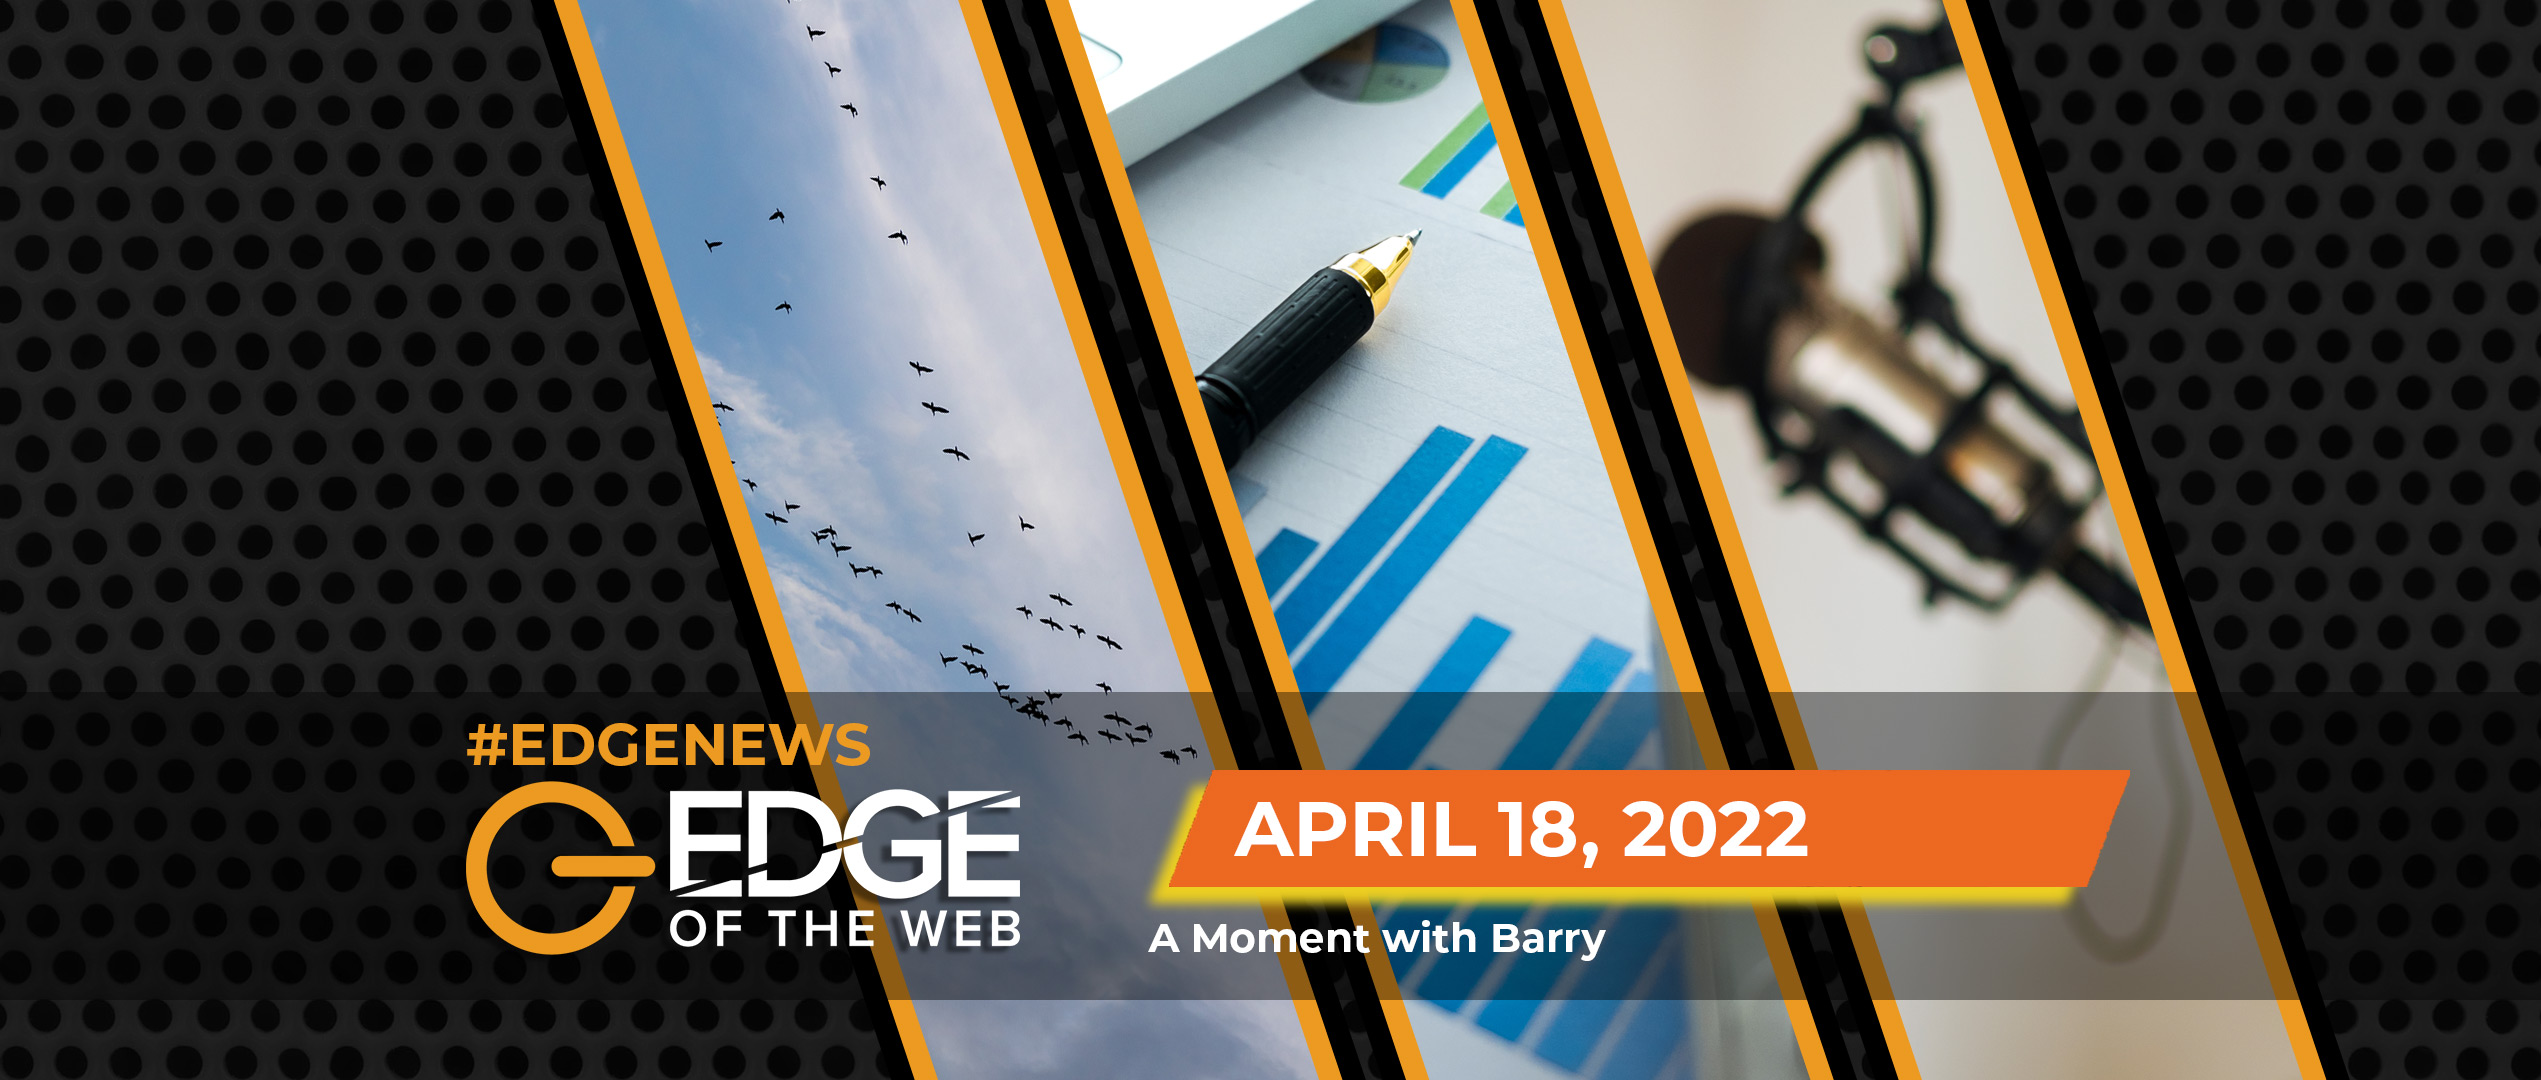 493 | News from the EDGE | Week of 4.18.2022